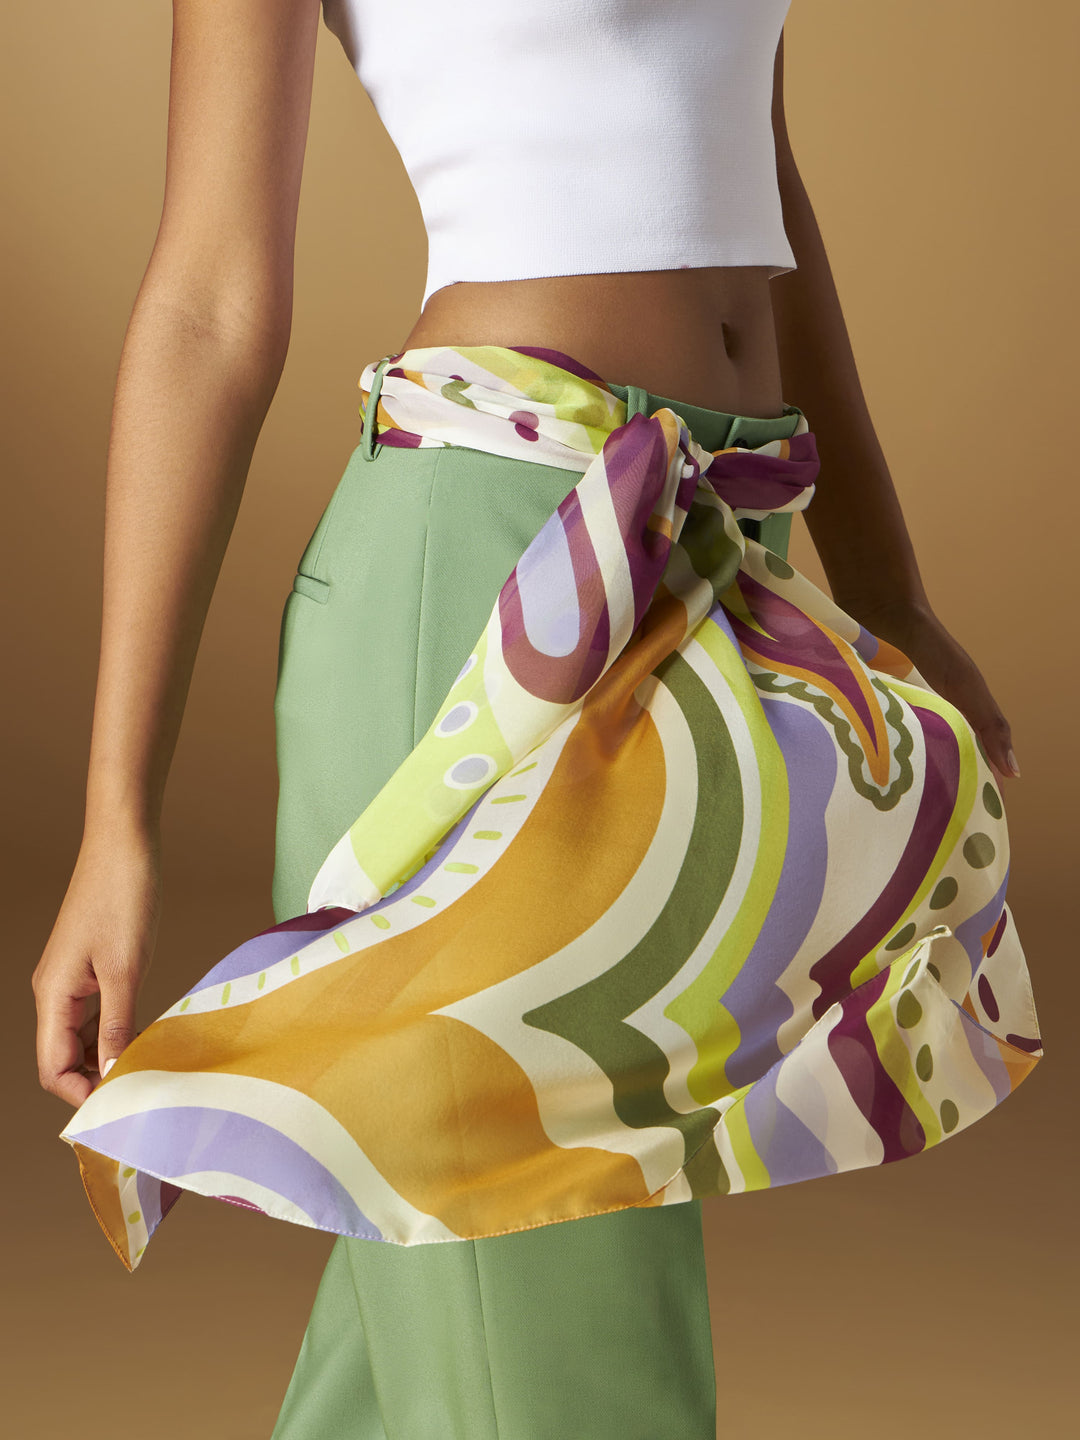 Fashionable woman wearing colorful silky scarf tied around her waist with green pants and white crop top